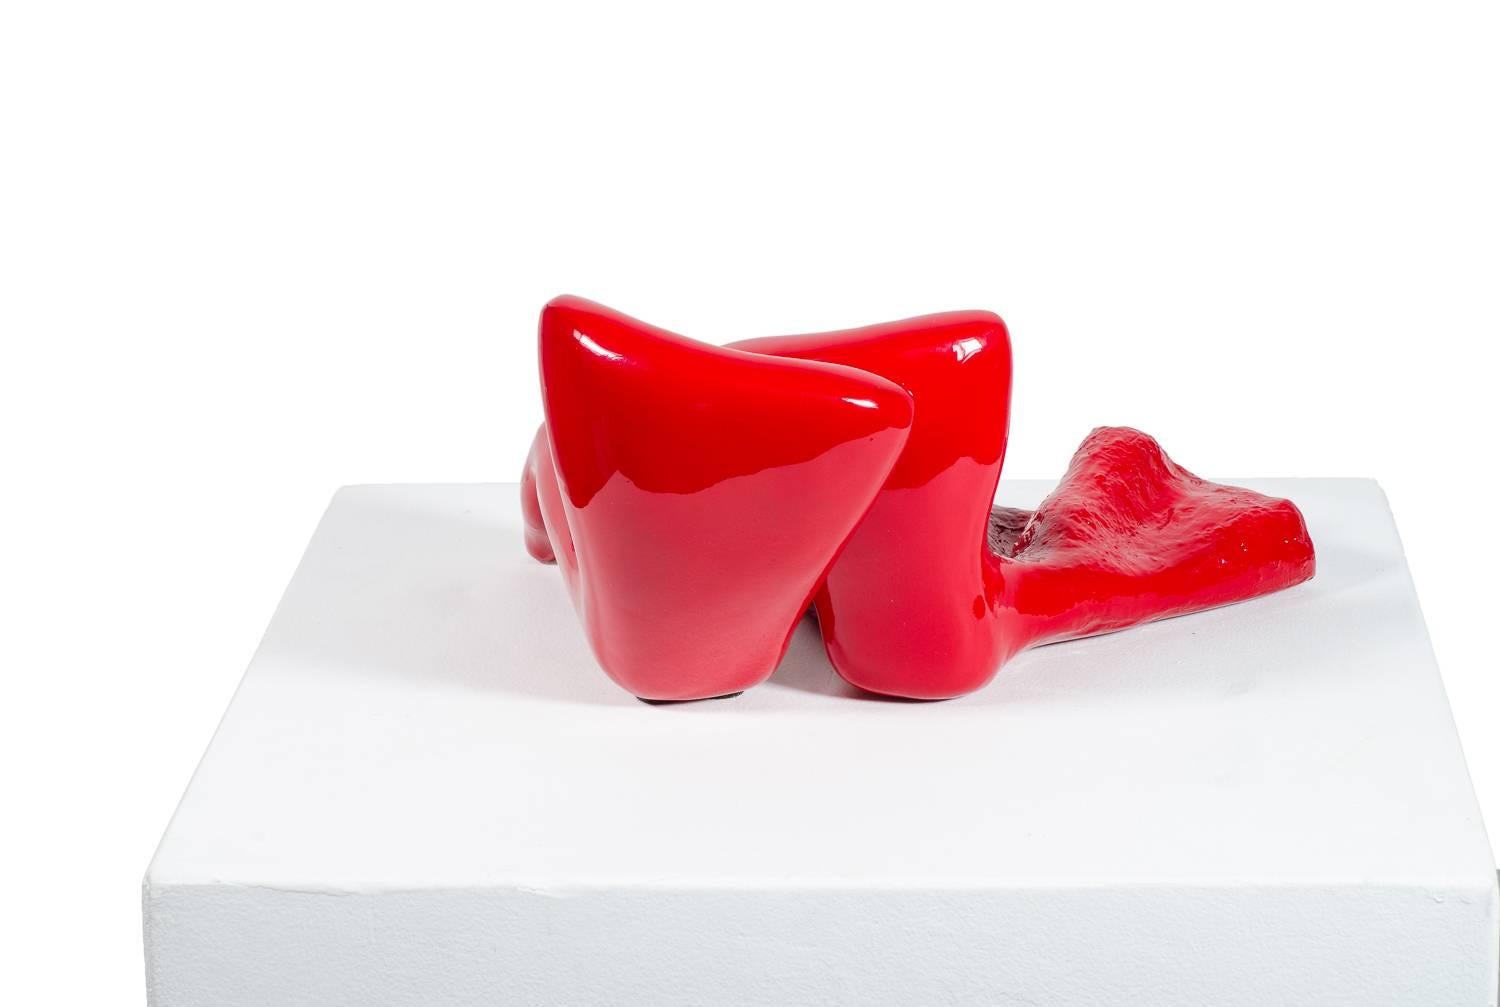 Couple (in red). The couple fell in love; then they lost their heads!
Beatriz Gerenstein bronze sculpture 